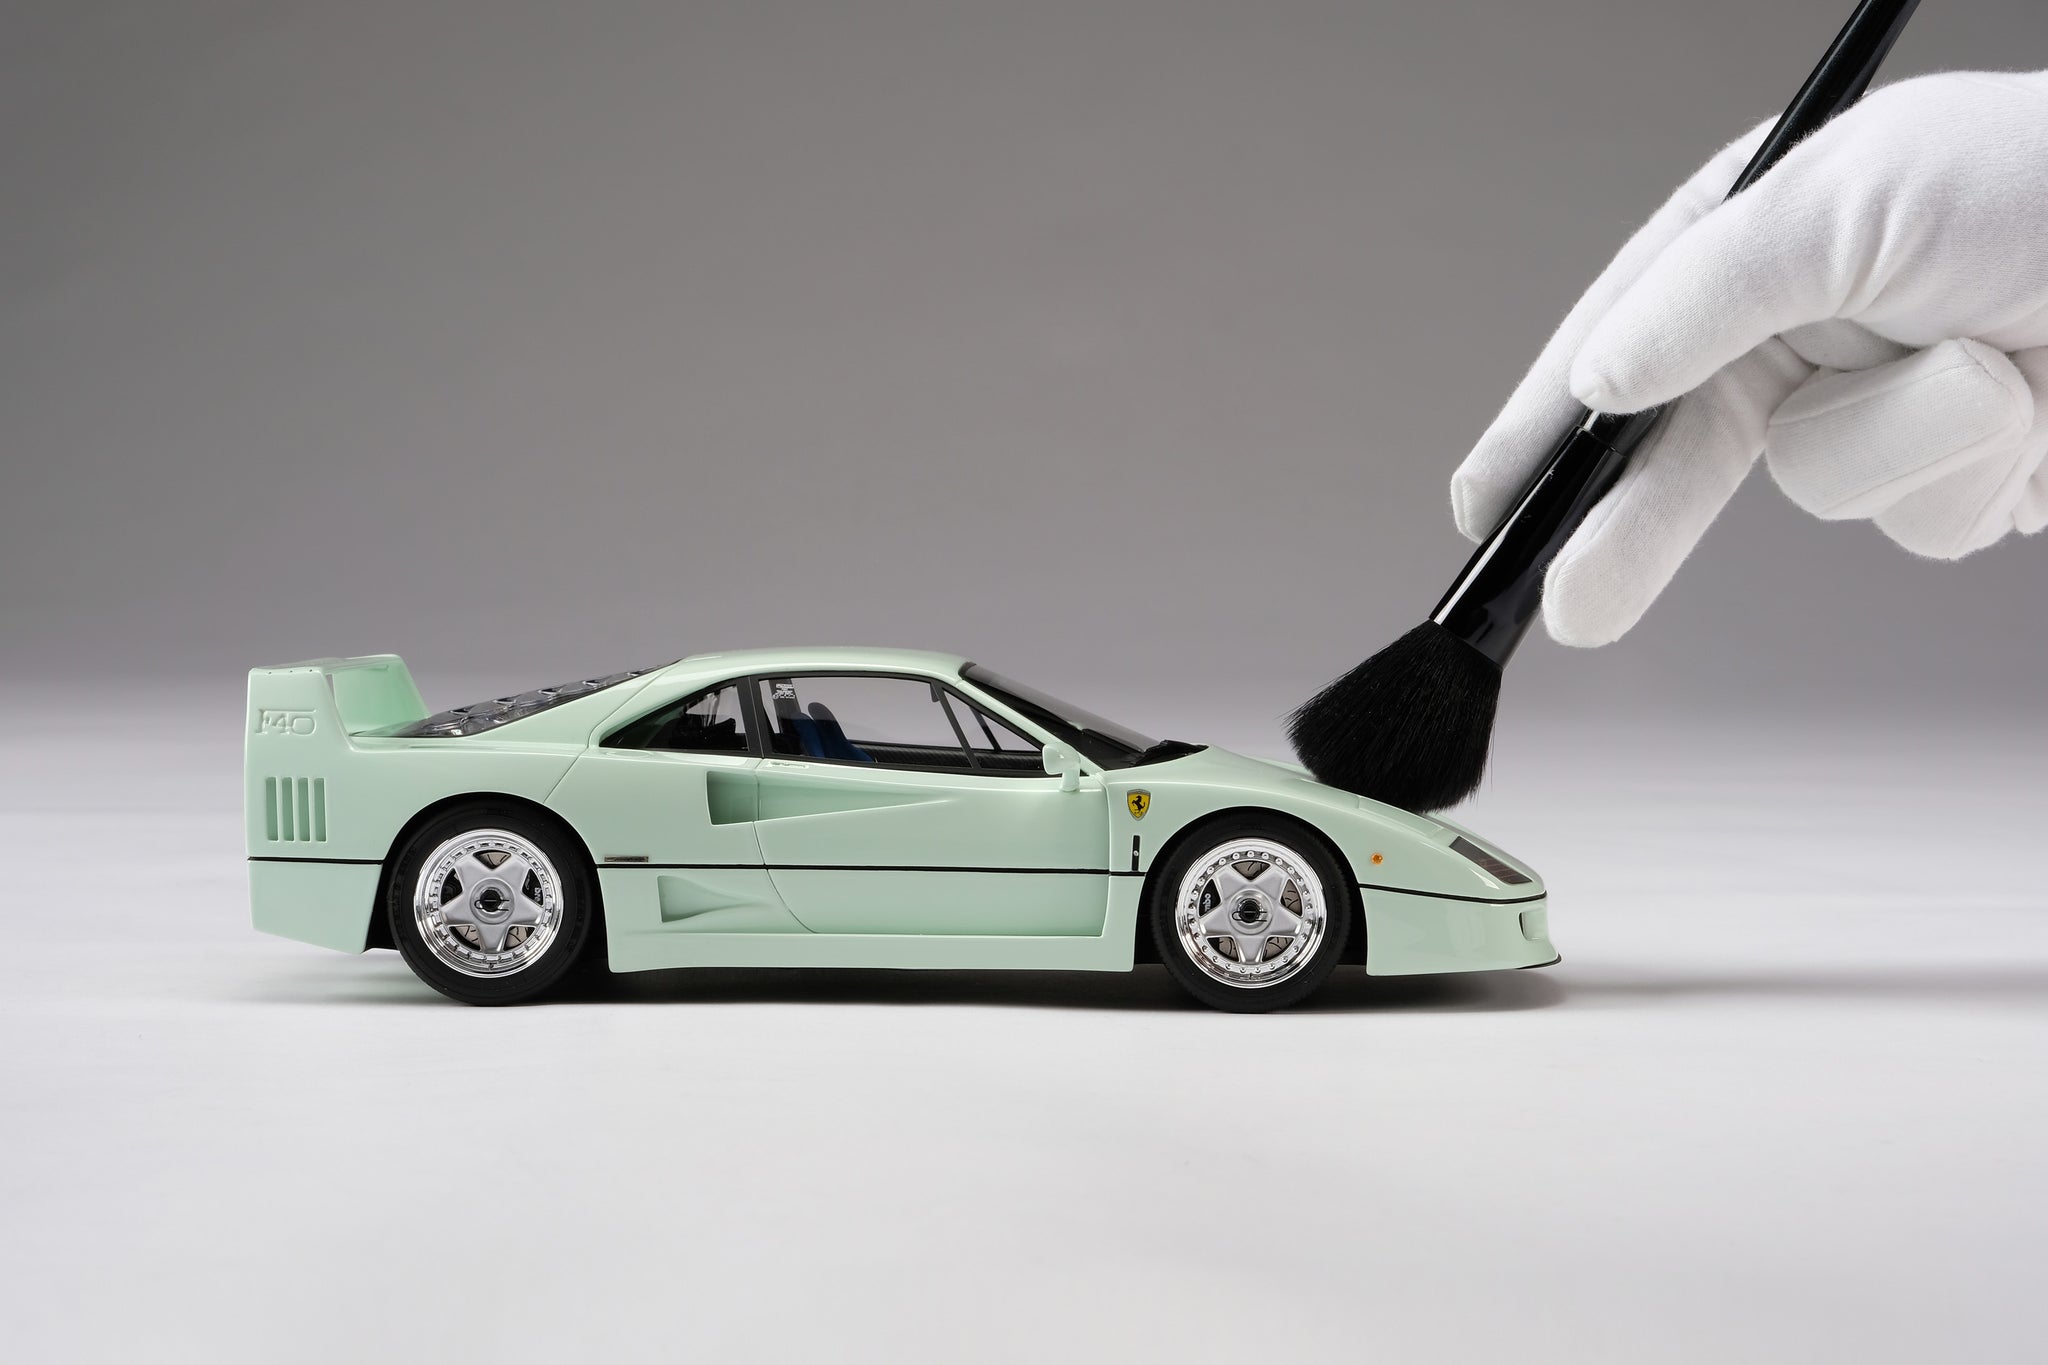 'Minty Forty' Ferrari F40 at 1:18 scale